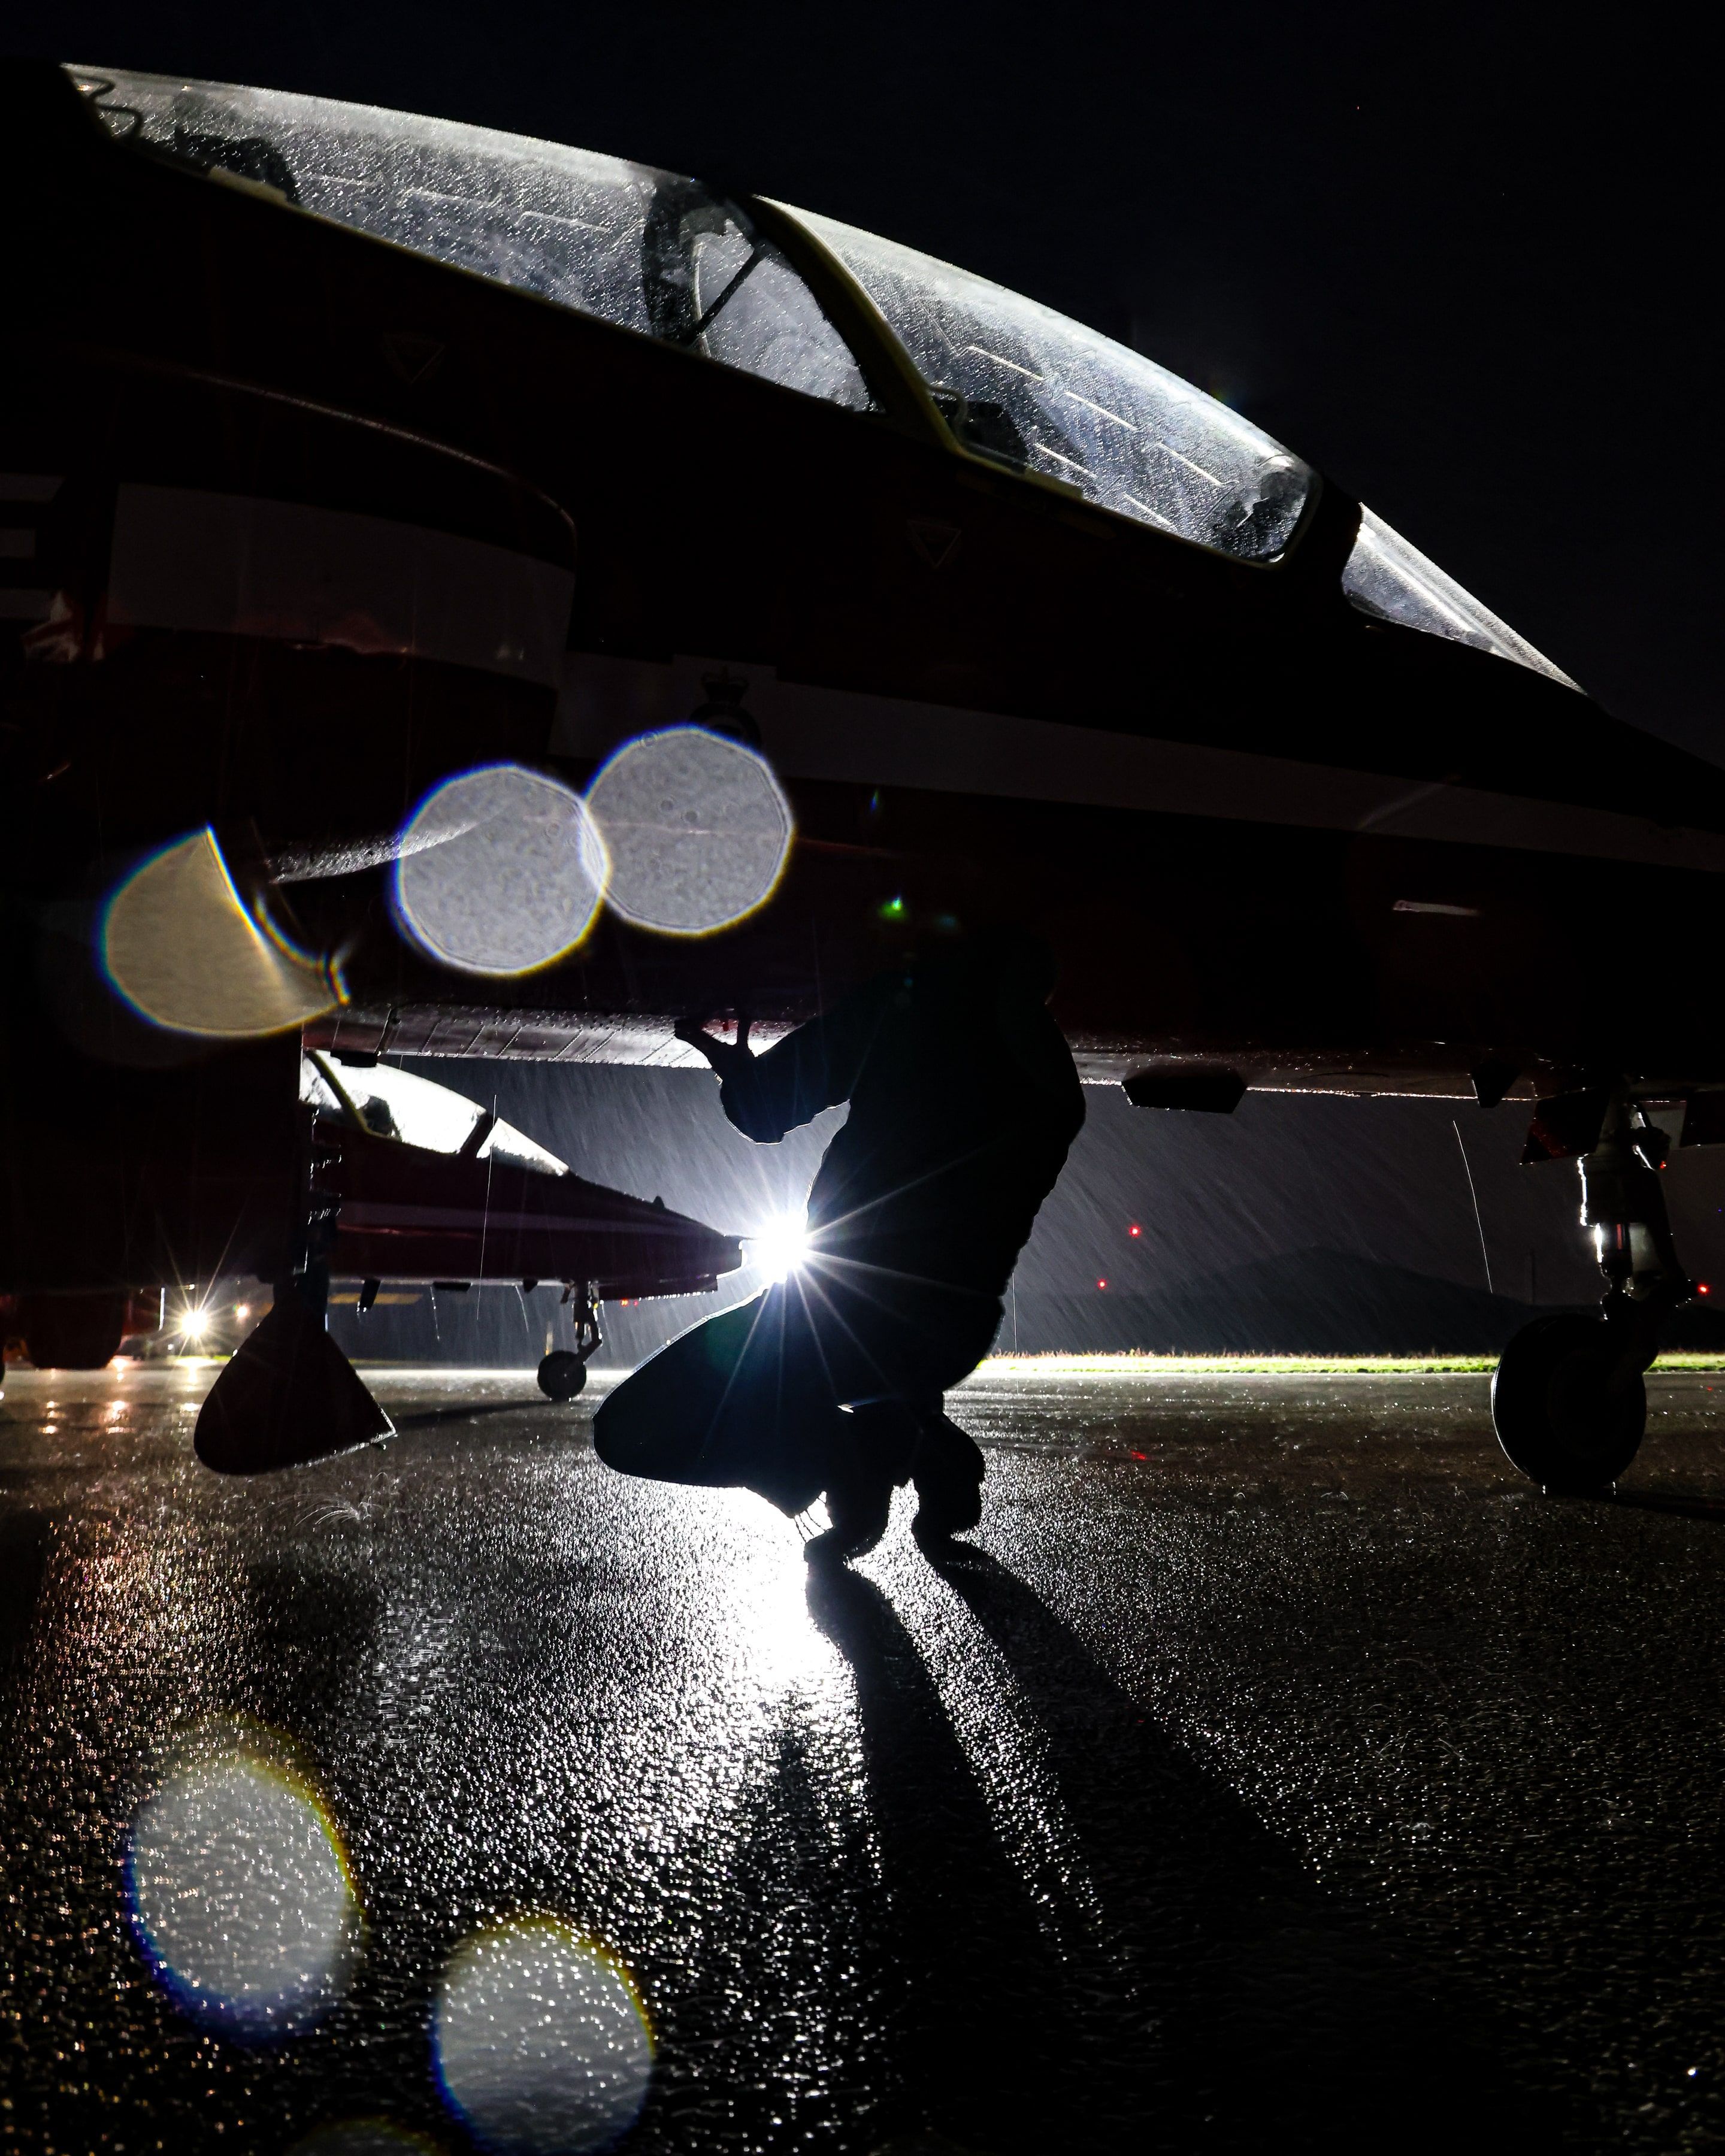 Engineer at night under the cockpit of an aircraft in the rain